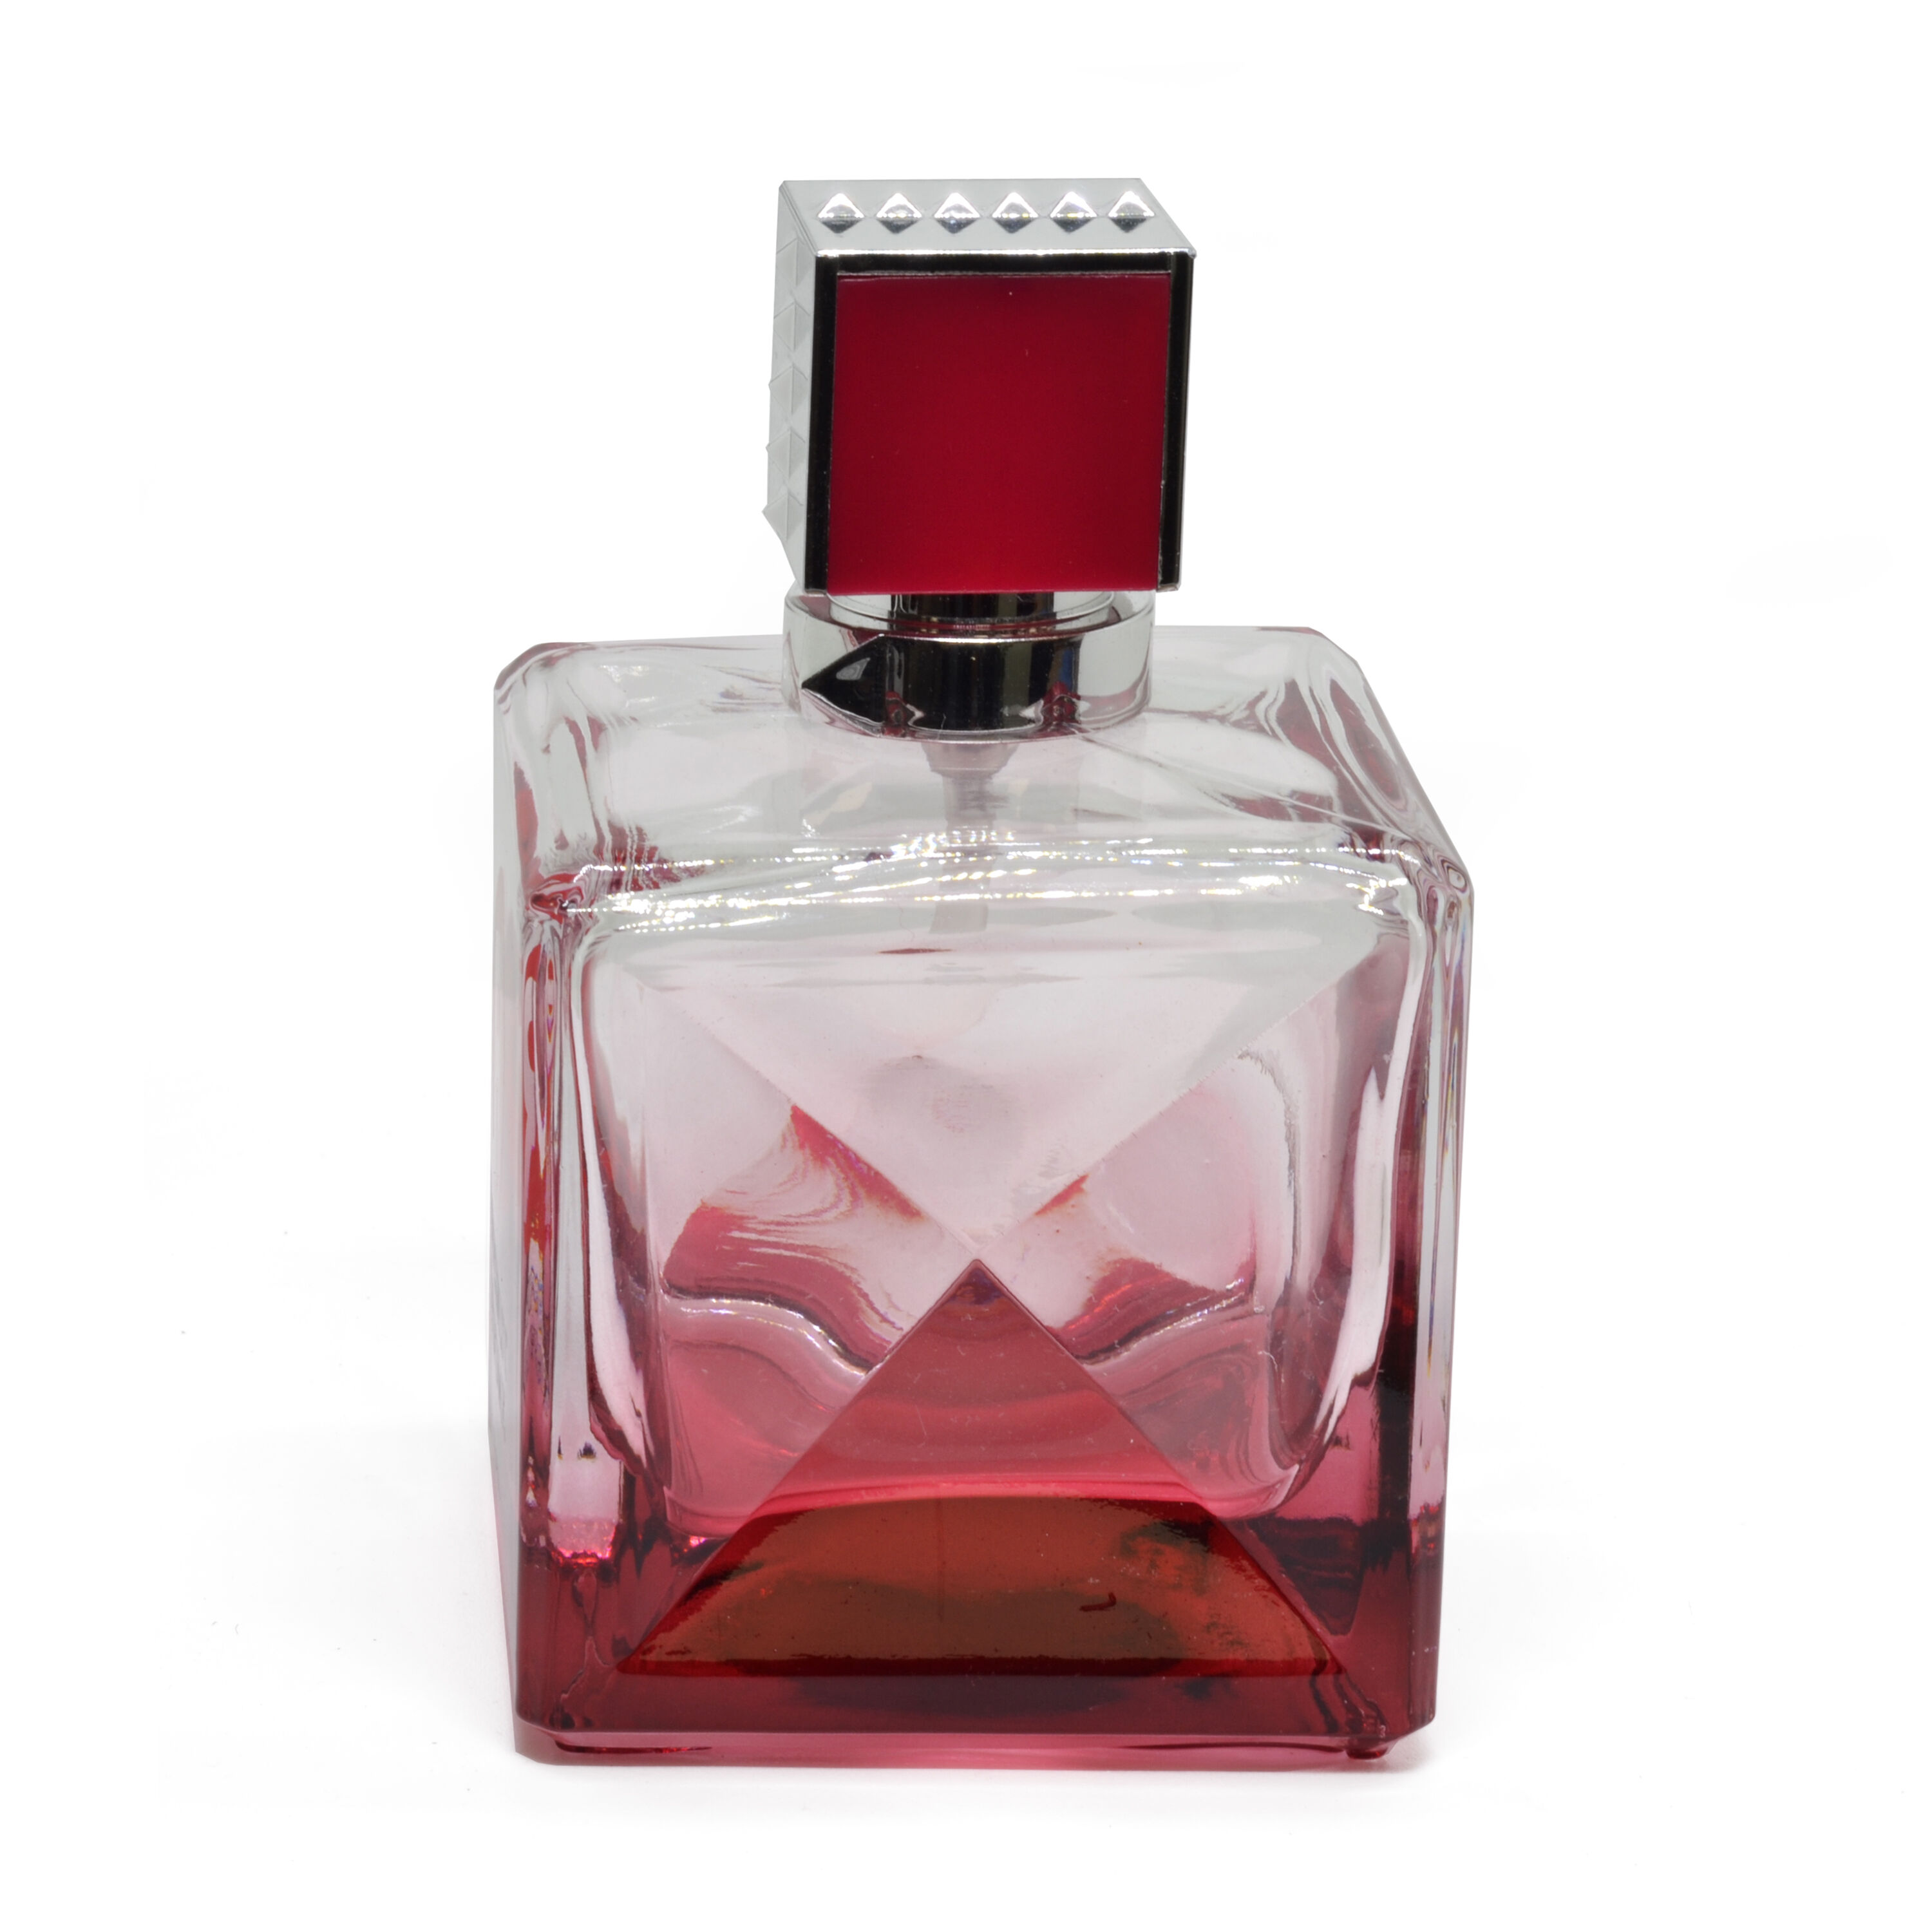 Small Clear glass Perfume spray bottle or container, Square design